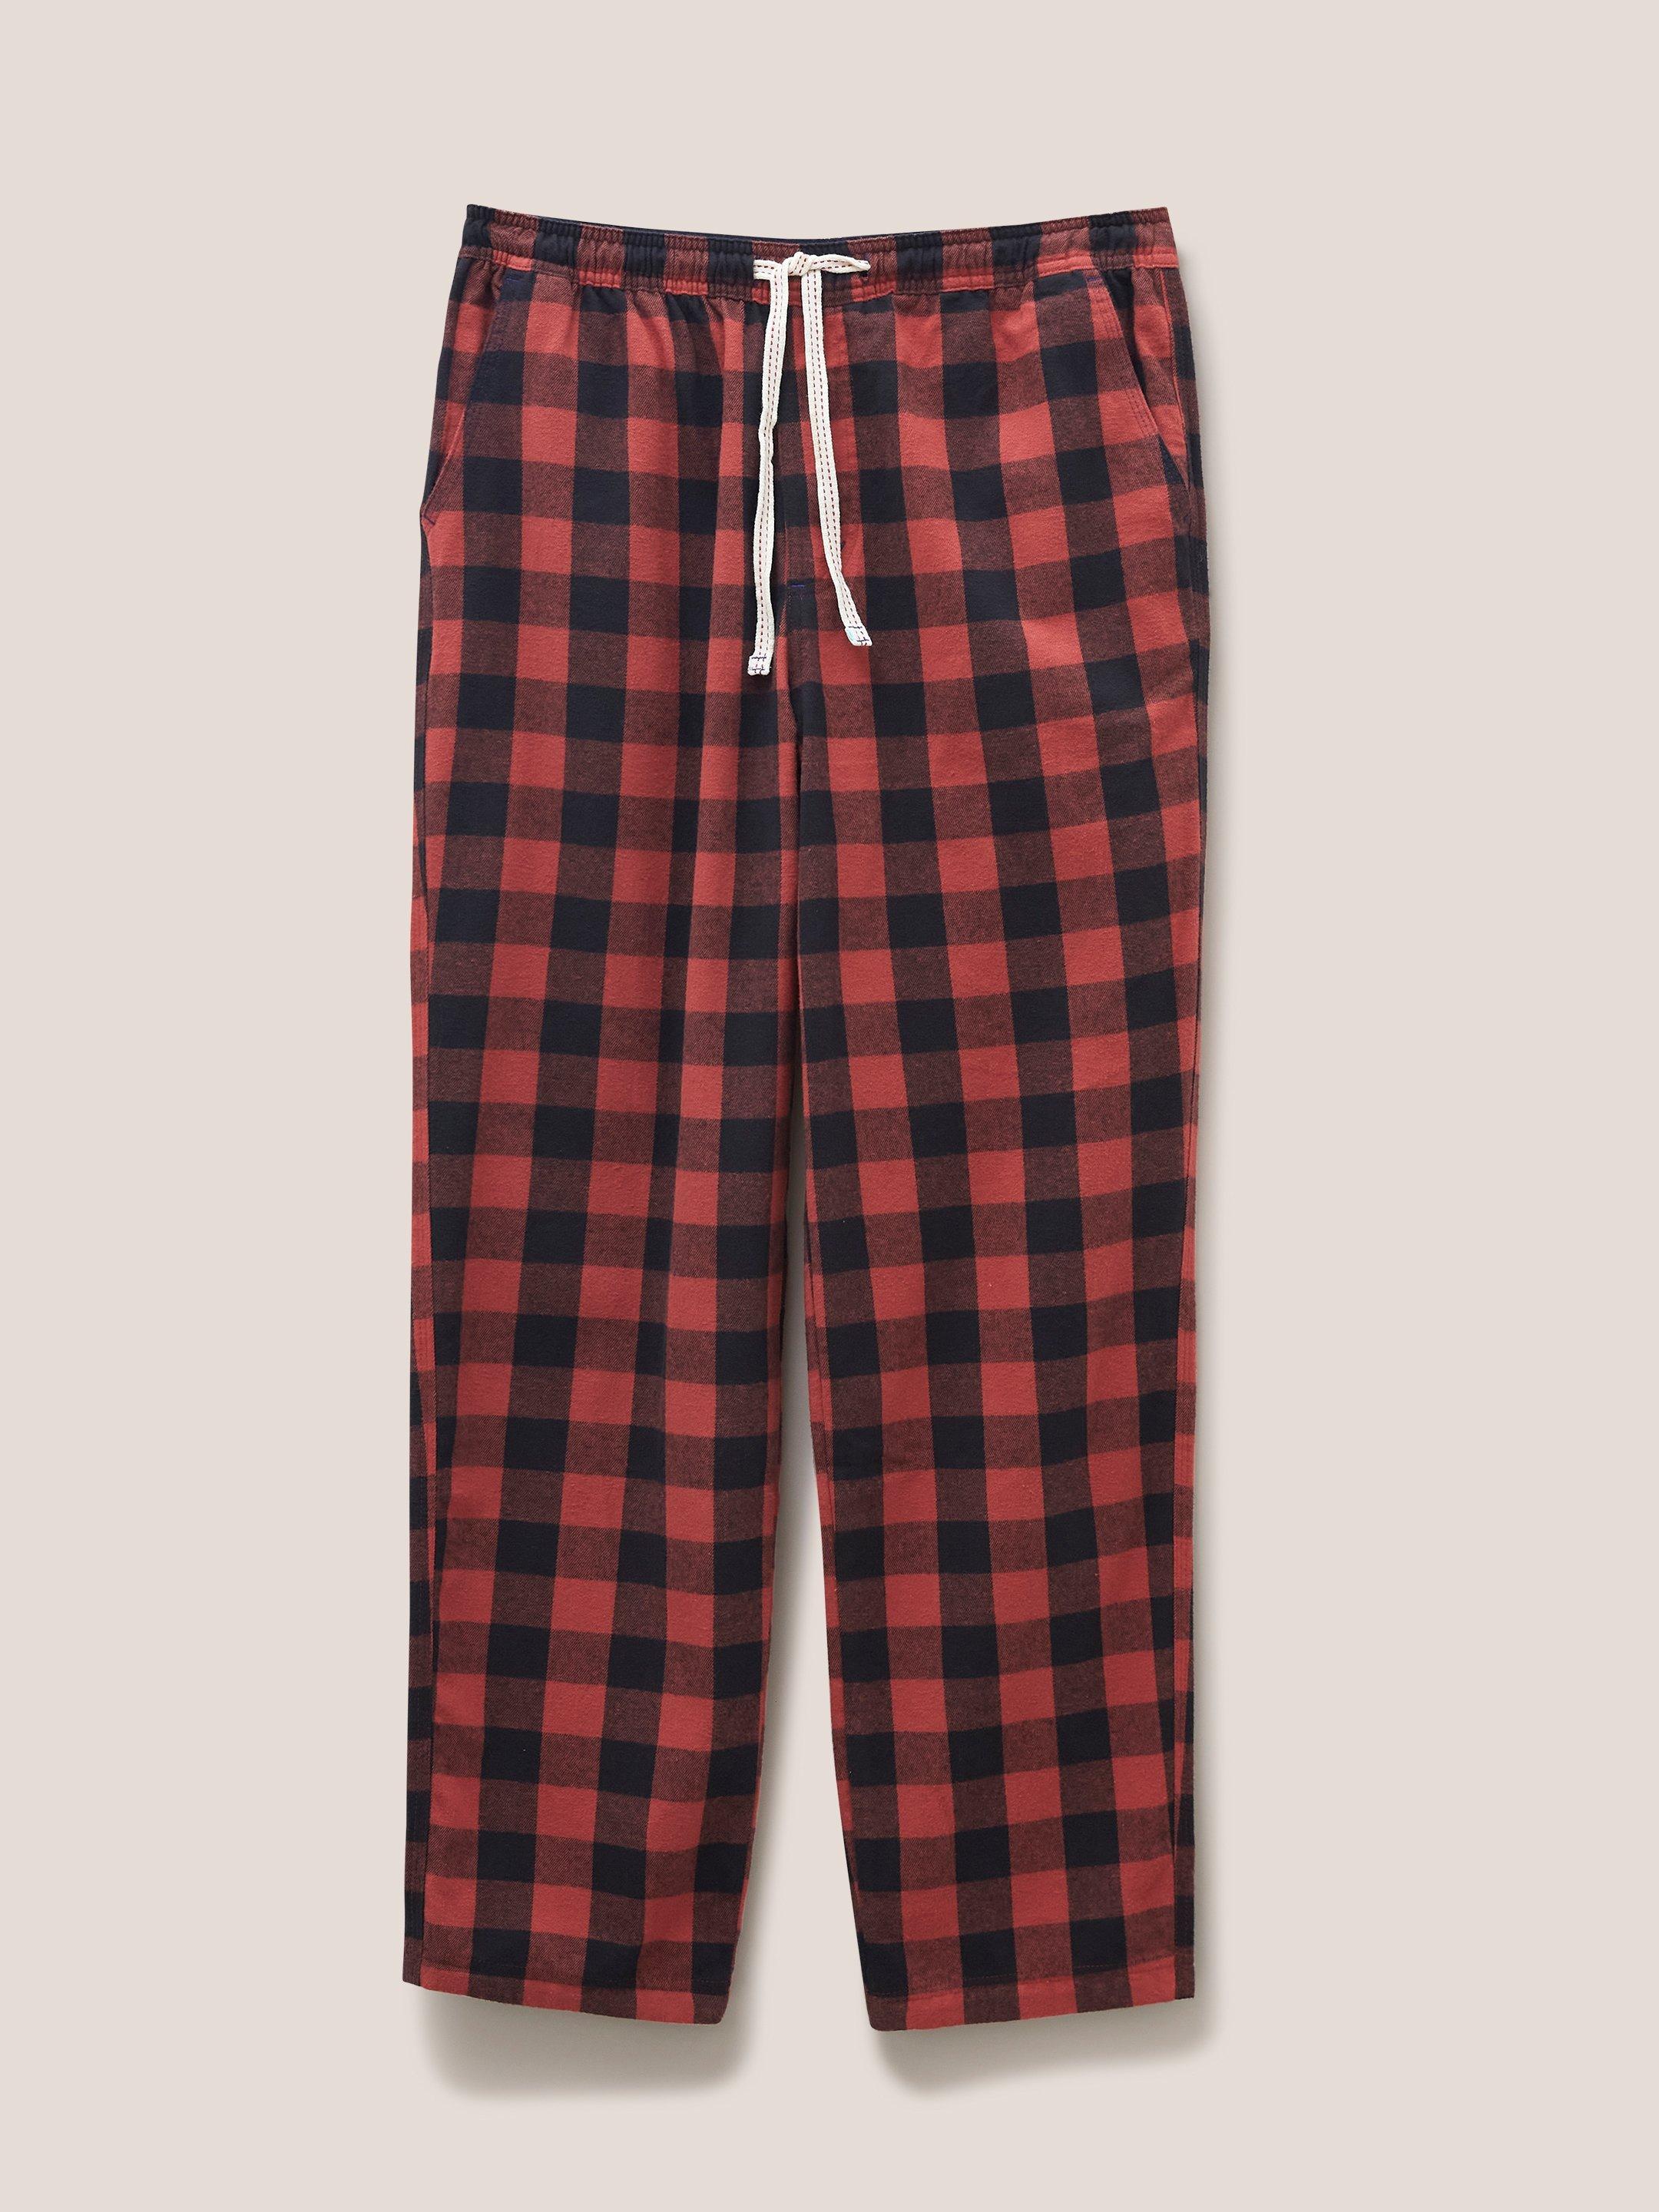 Leyland PJ Trouser in MID RED - FLAT FRONT